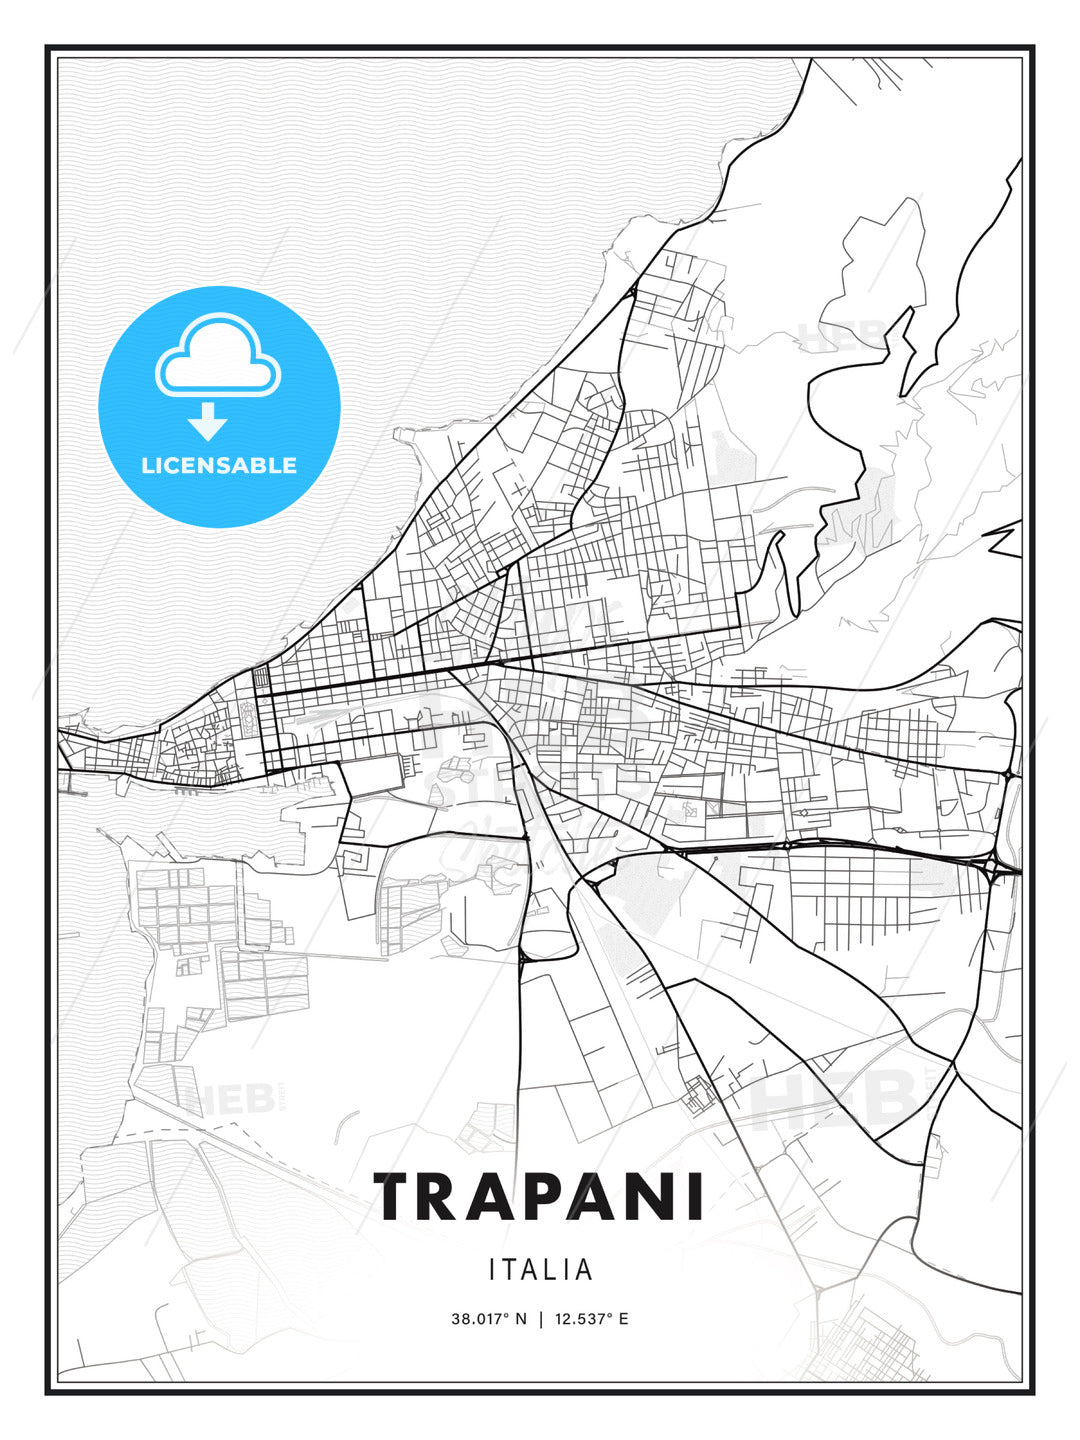 Trapani, Italy, Modern Print Template in Various Formats - HEBSTREITS Sketches